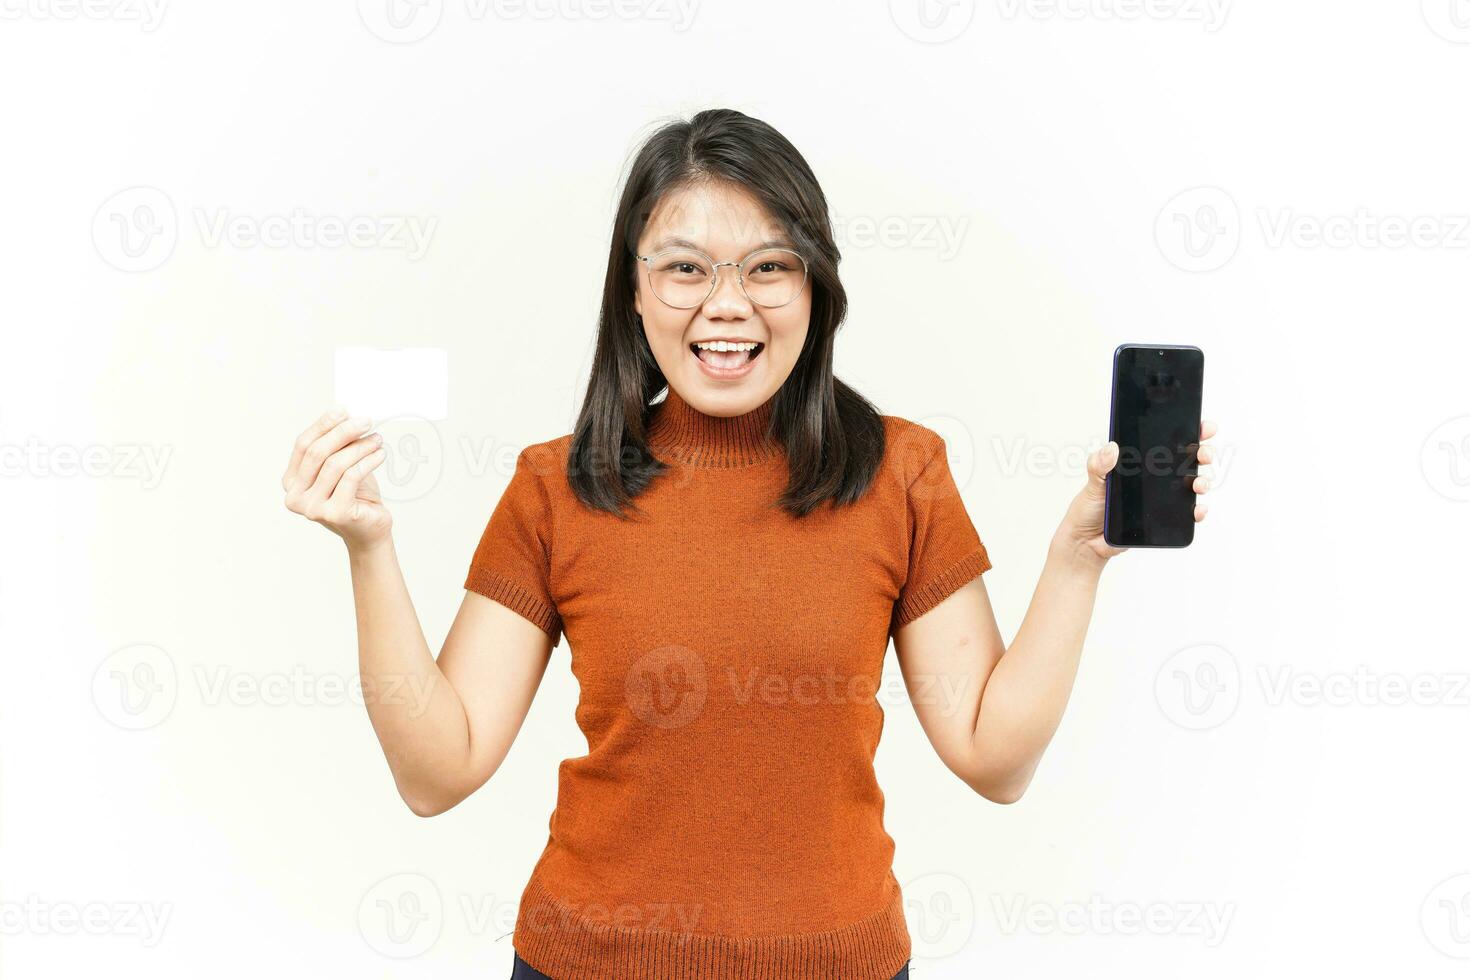 Holding Blank Bank Card and Smartphone With Blank Screen Of Beautiful Asian Woman Isolated On White photo